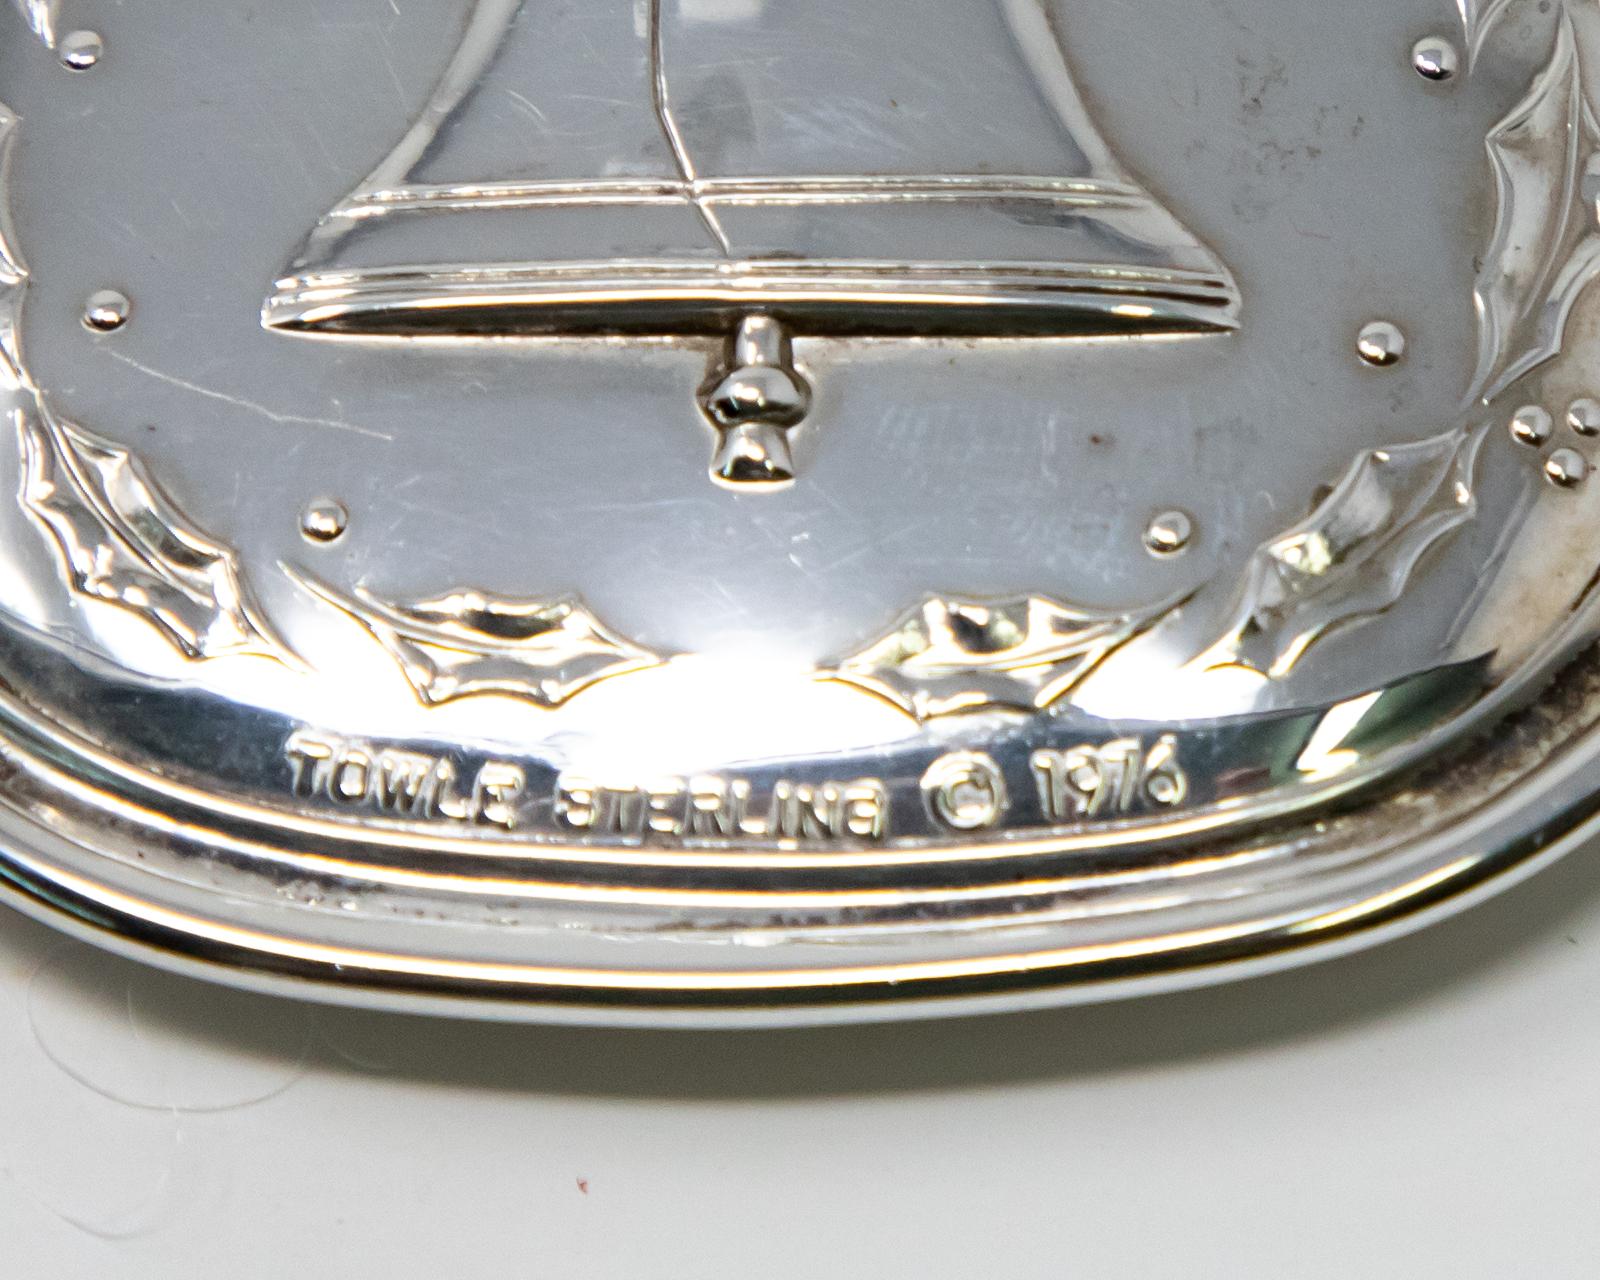 Offering this beautiful Towle sterling ornament from 1976. The front depicts the six geese a laying with scrollwork. The back depicts the Liberty Bell and is marked Towle Sterling, 1976.